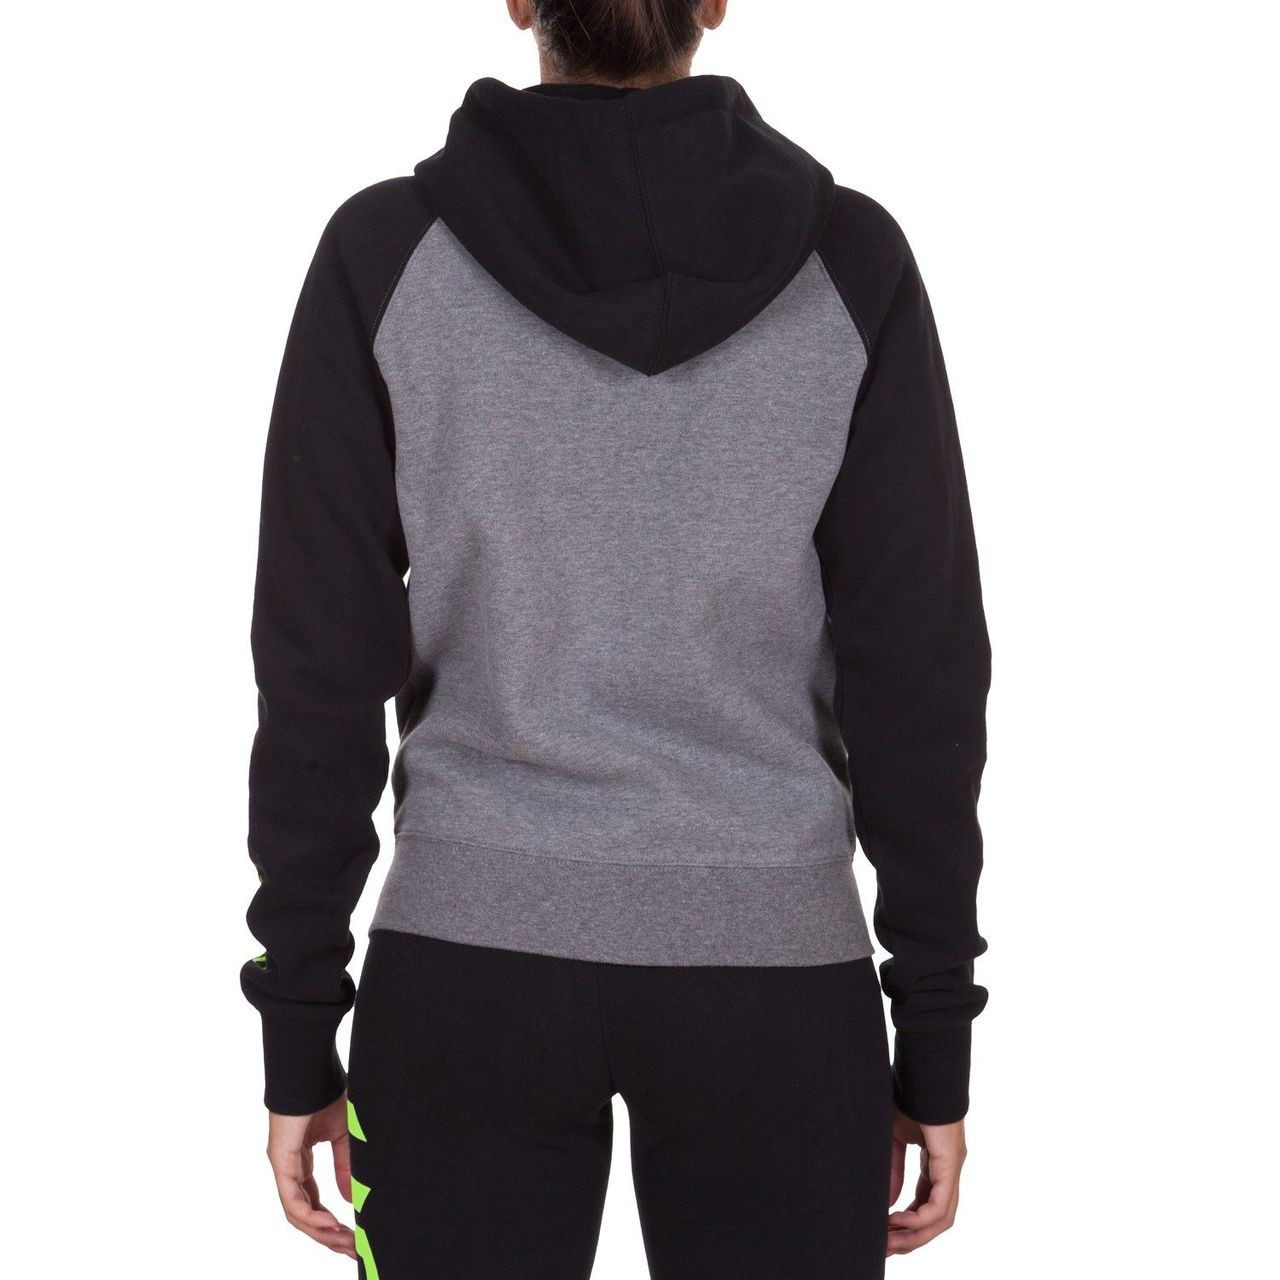 Back view of the Venum Infinity Hoody designed for women.  Available at www.thejiujitsushop.com

Order now for free shipping across the store!